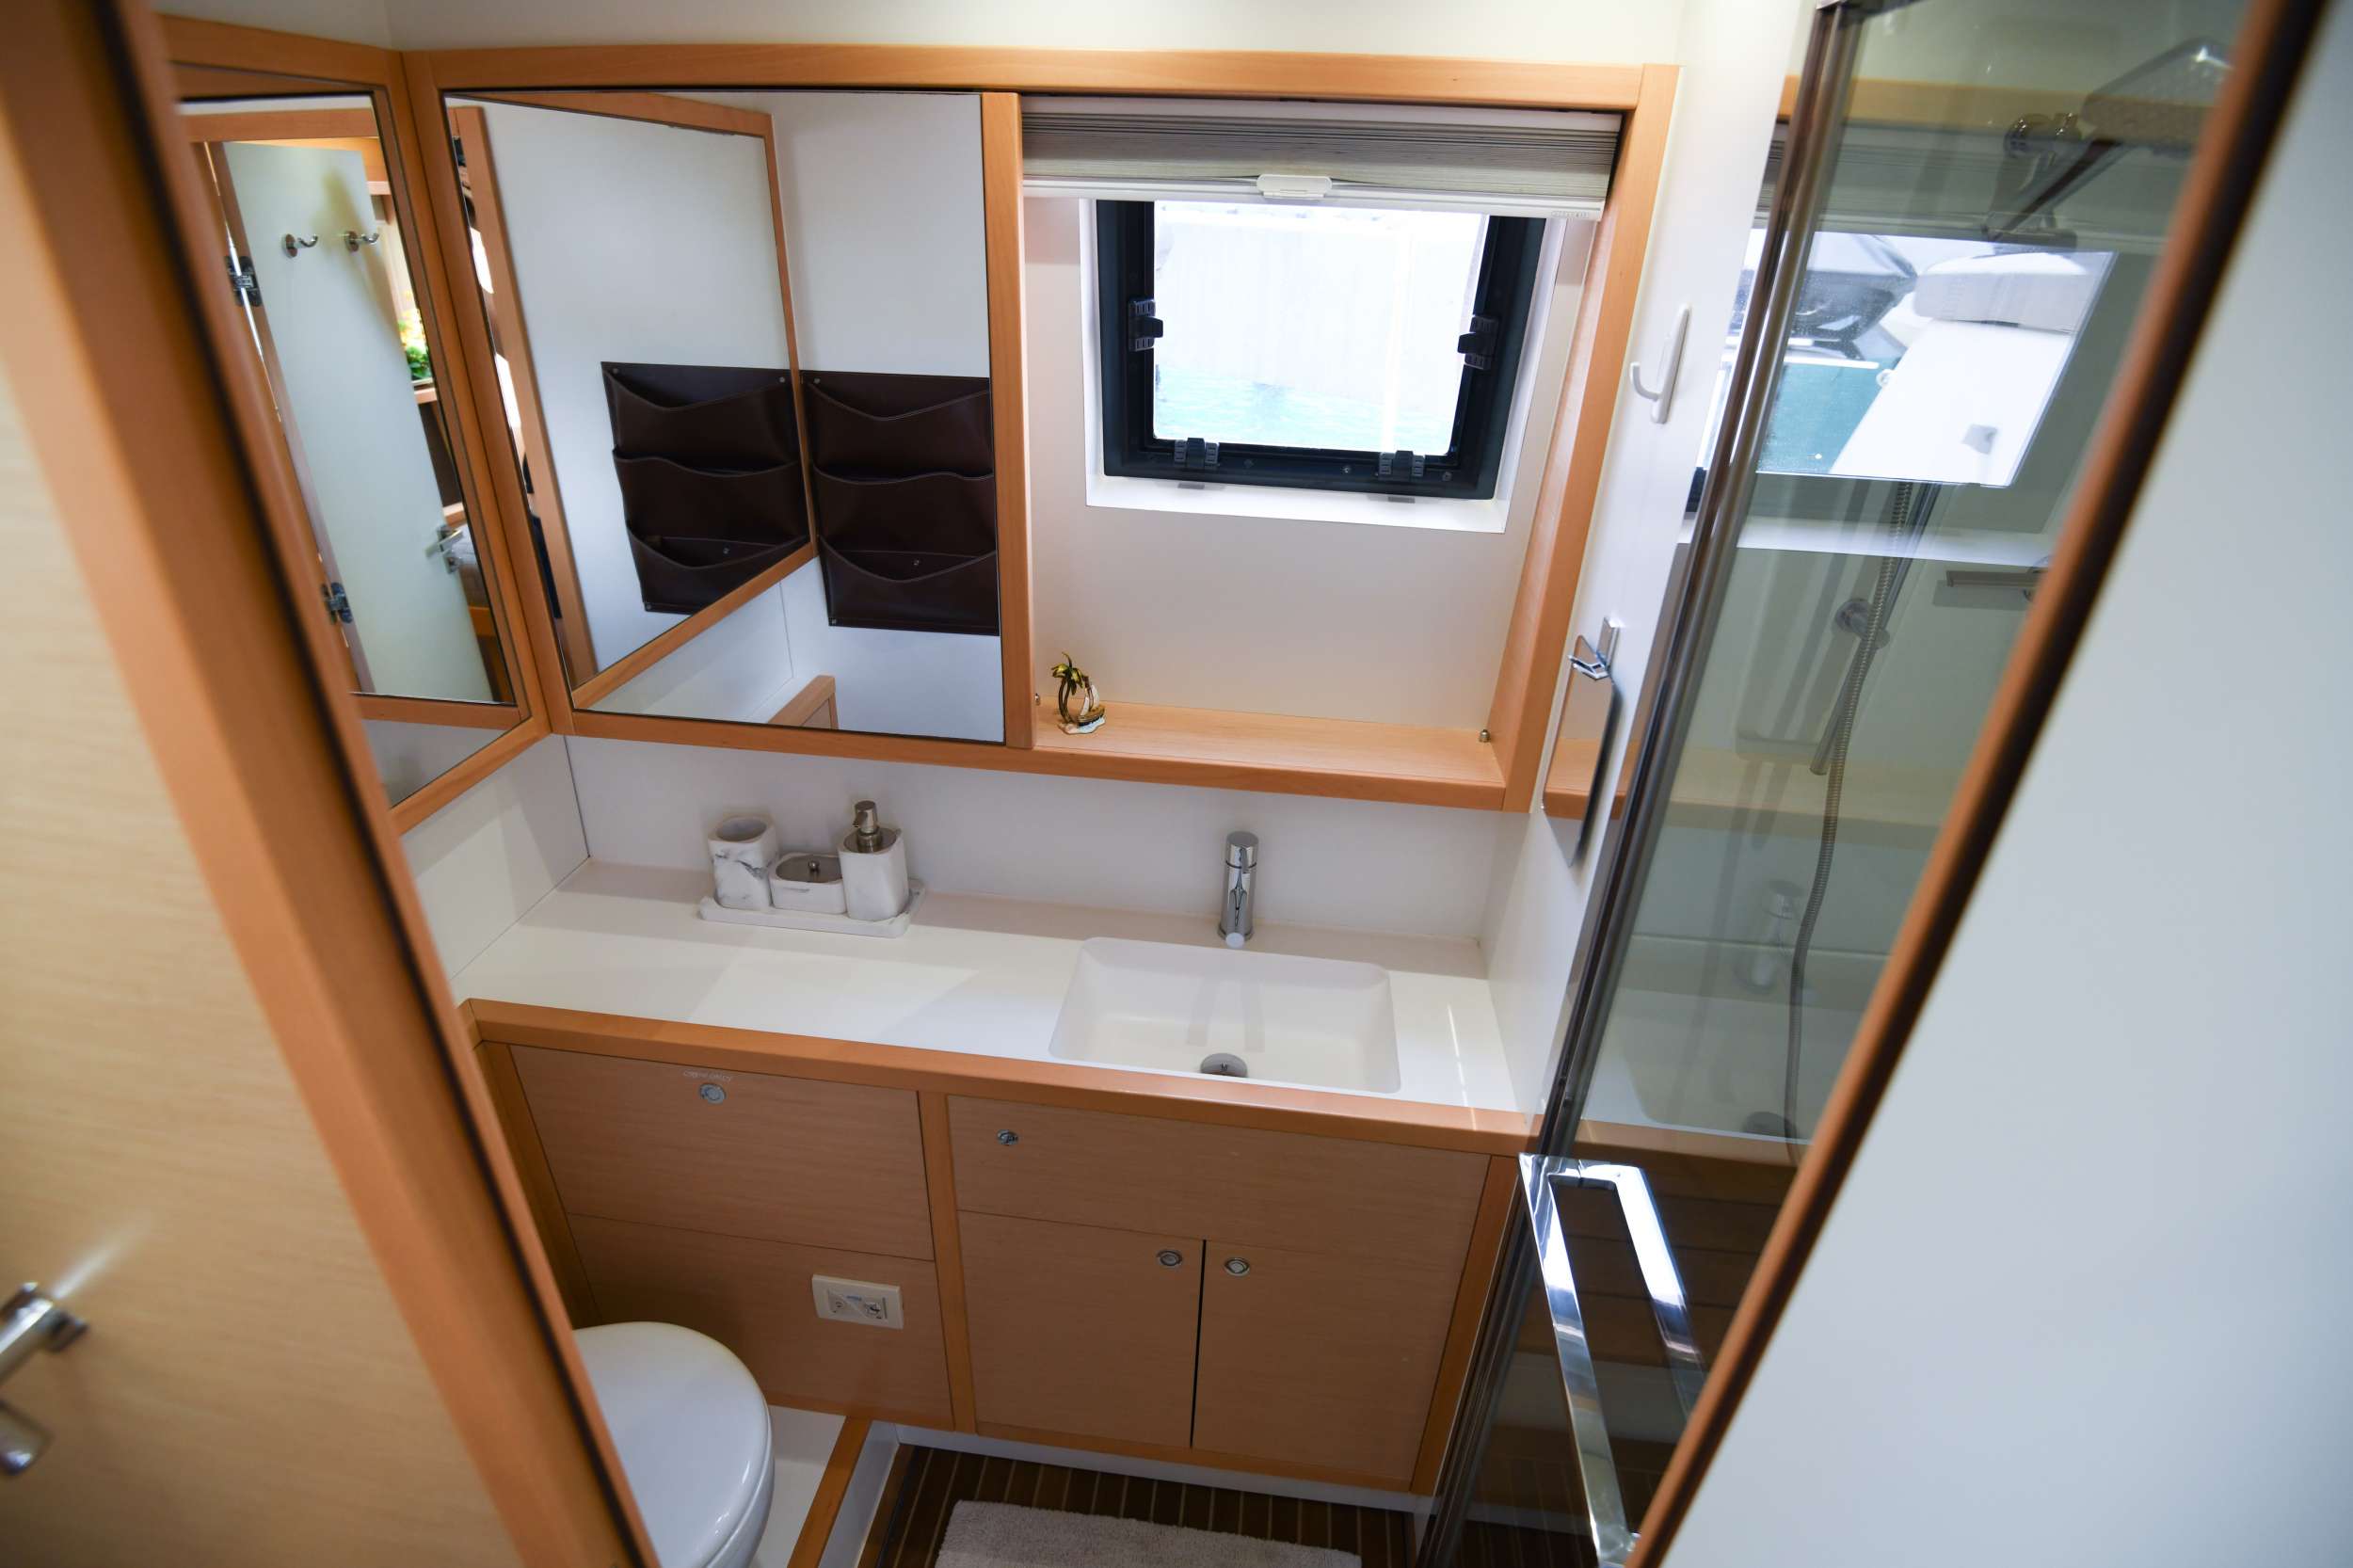 AZULIA II Yacht Charter - Guest bath with separate shower stall